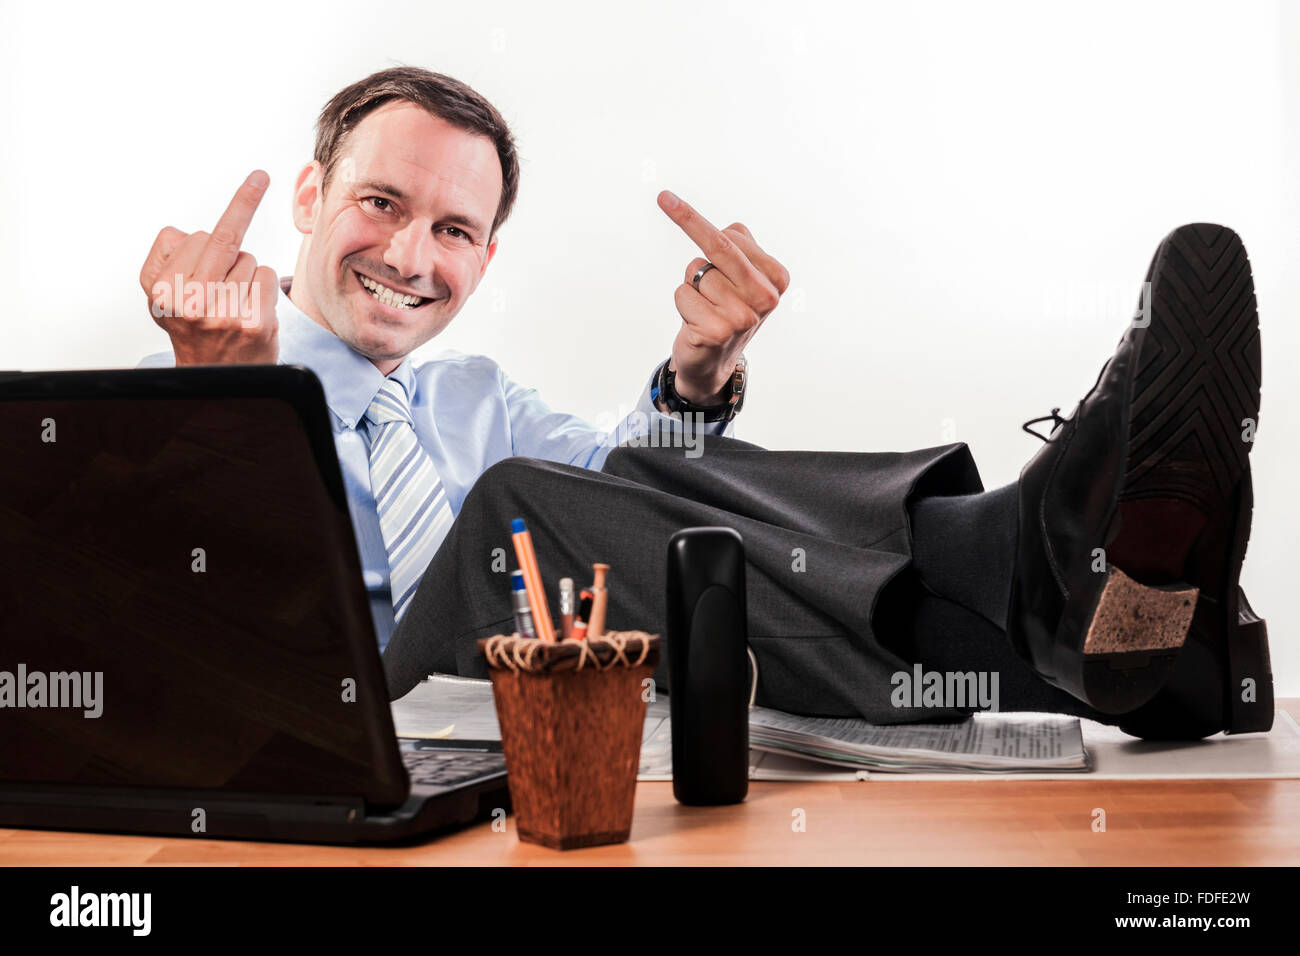 office employee working, answering phone, tired, happy, stressed, work life balance Stock Photo